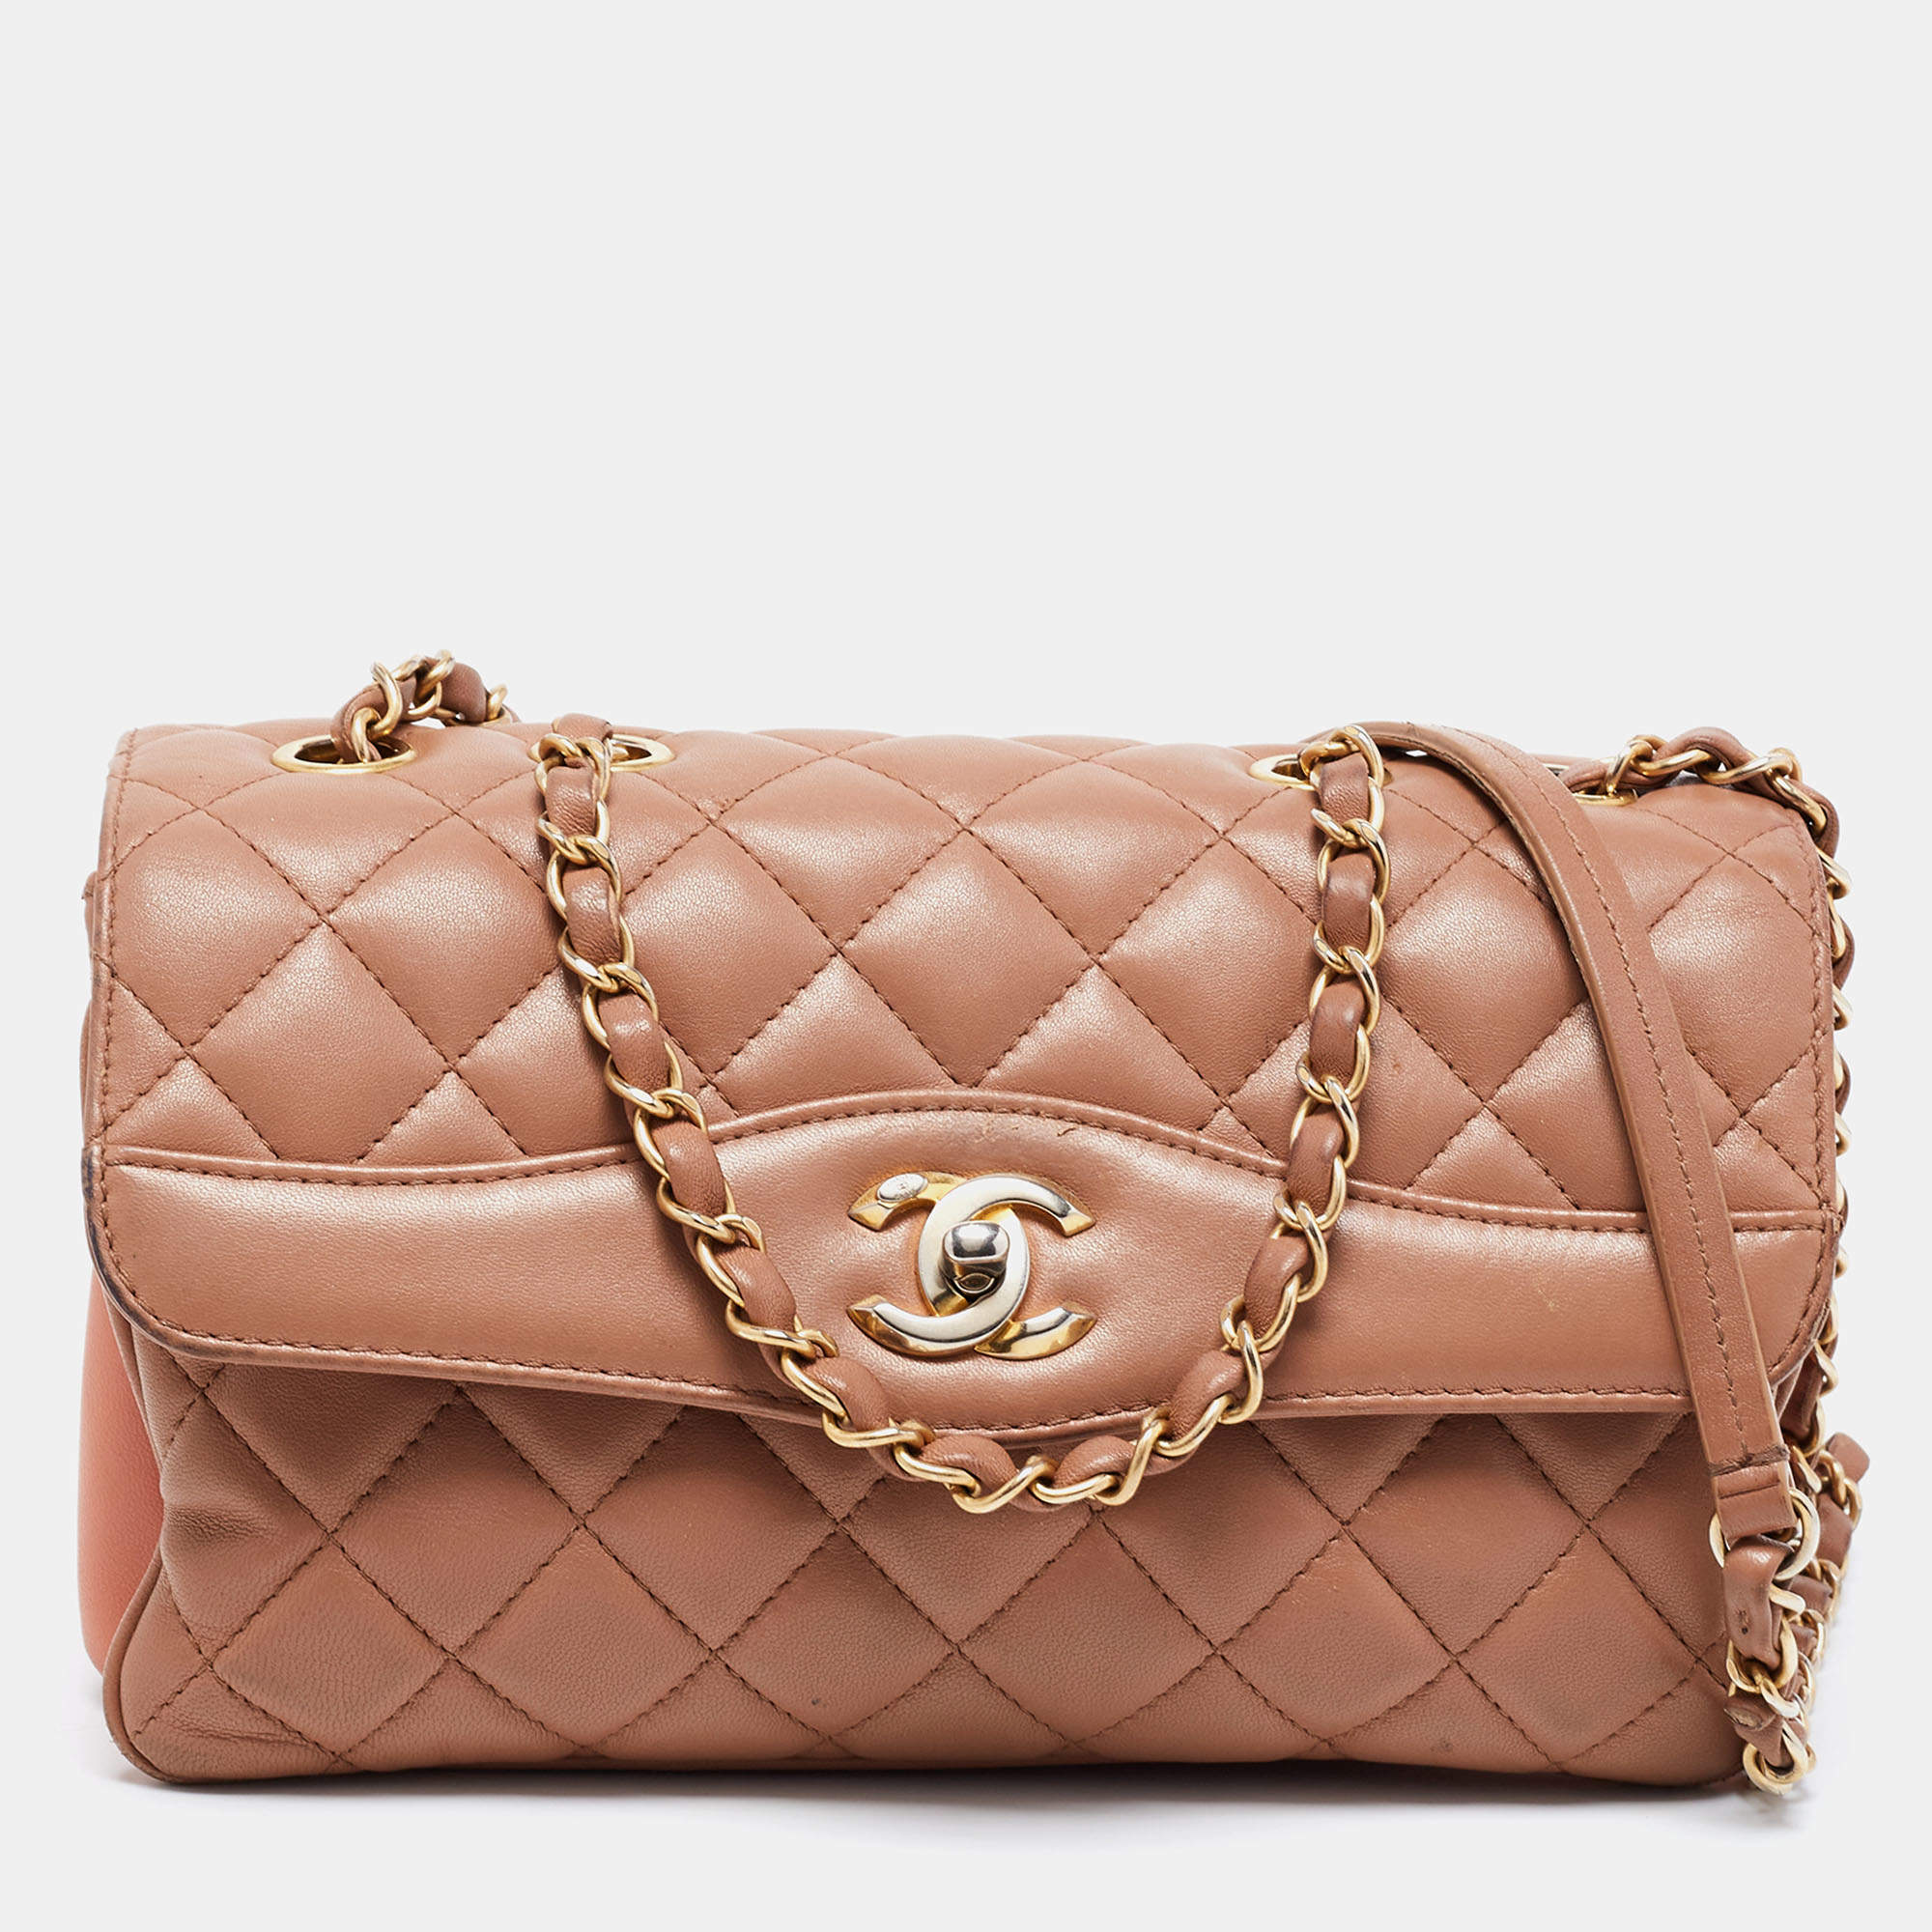 Chanel Beige/Peach Quilted Leather Straight Line Flap Bag Chanel